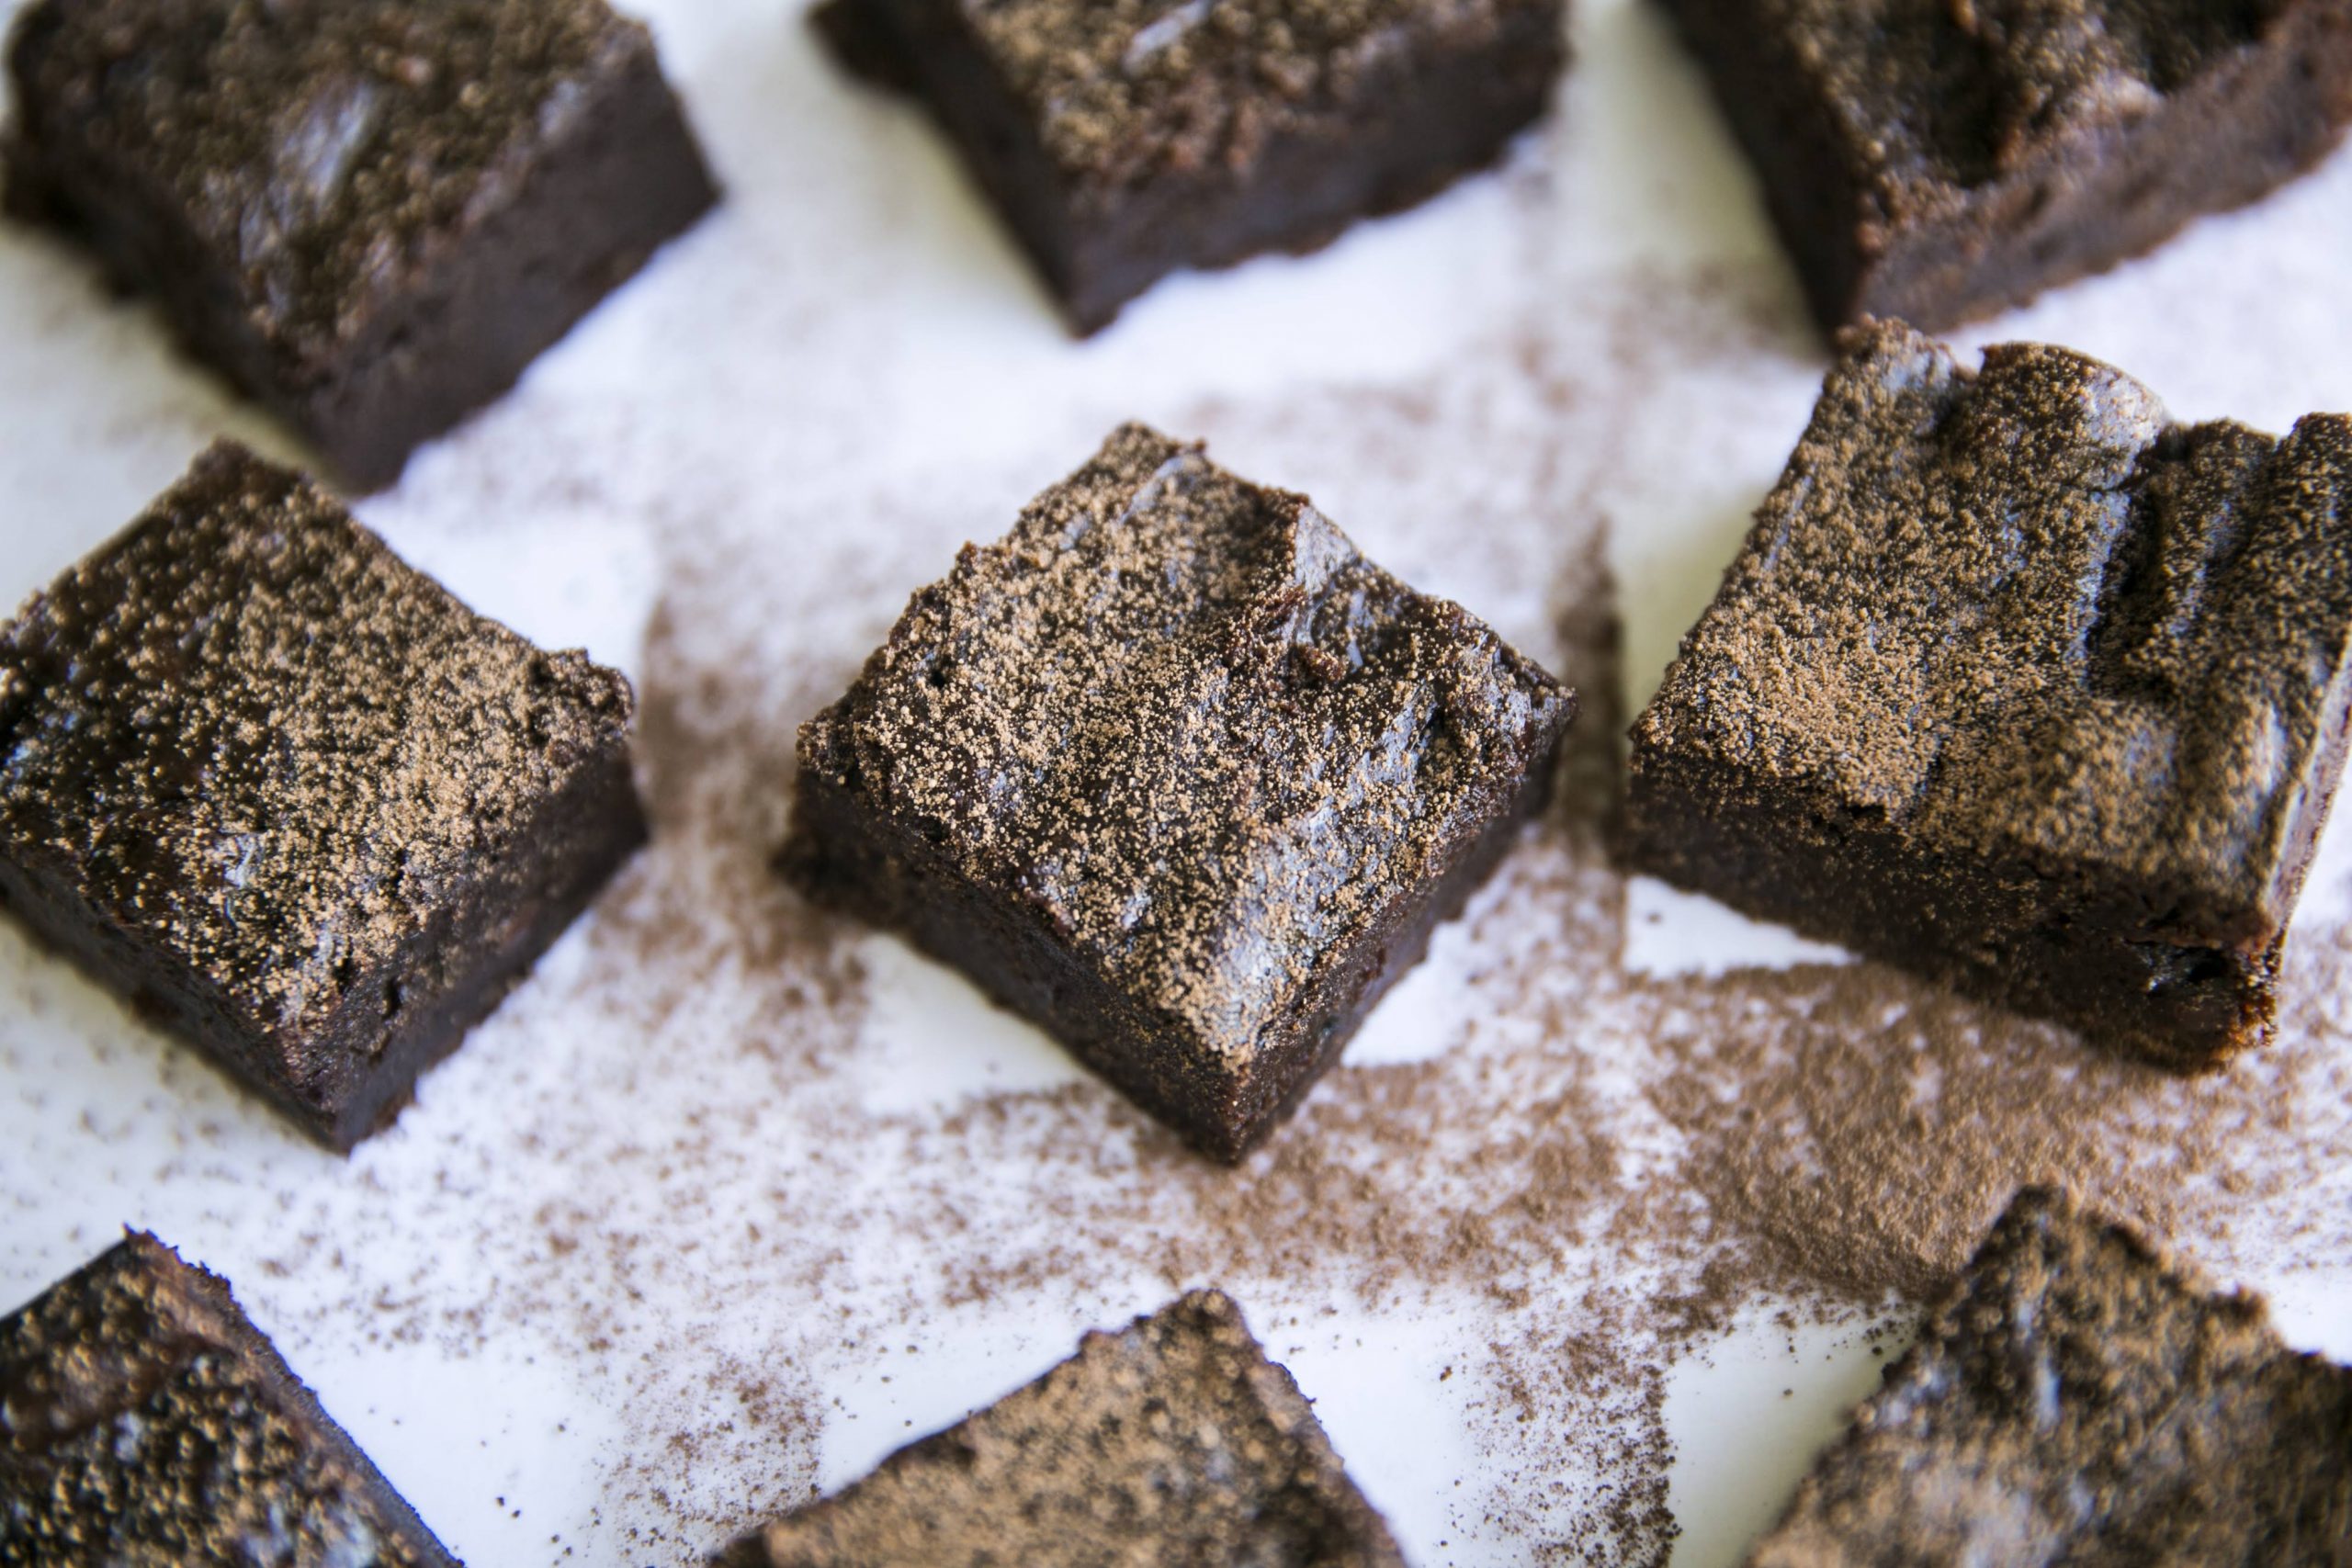 Ripe Avocados Are Perfect For Your Next Batch of Brownies